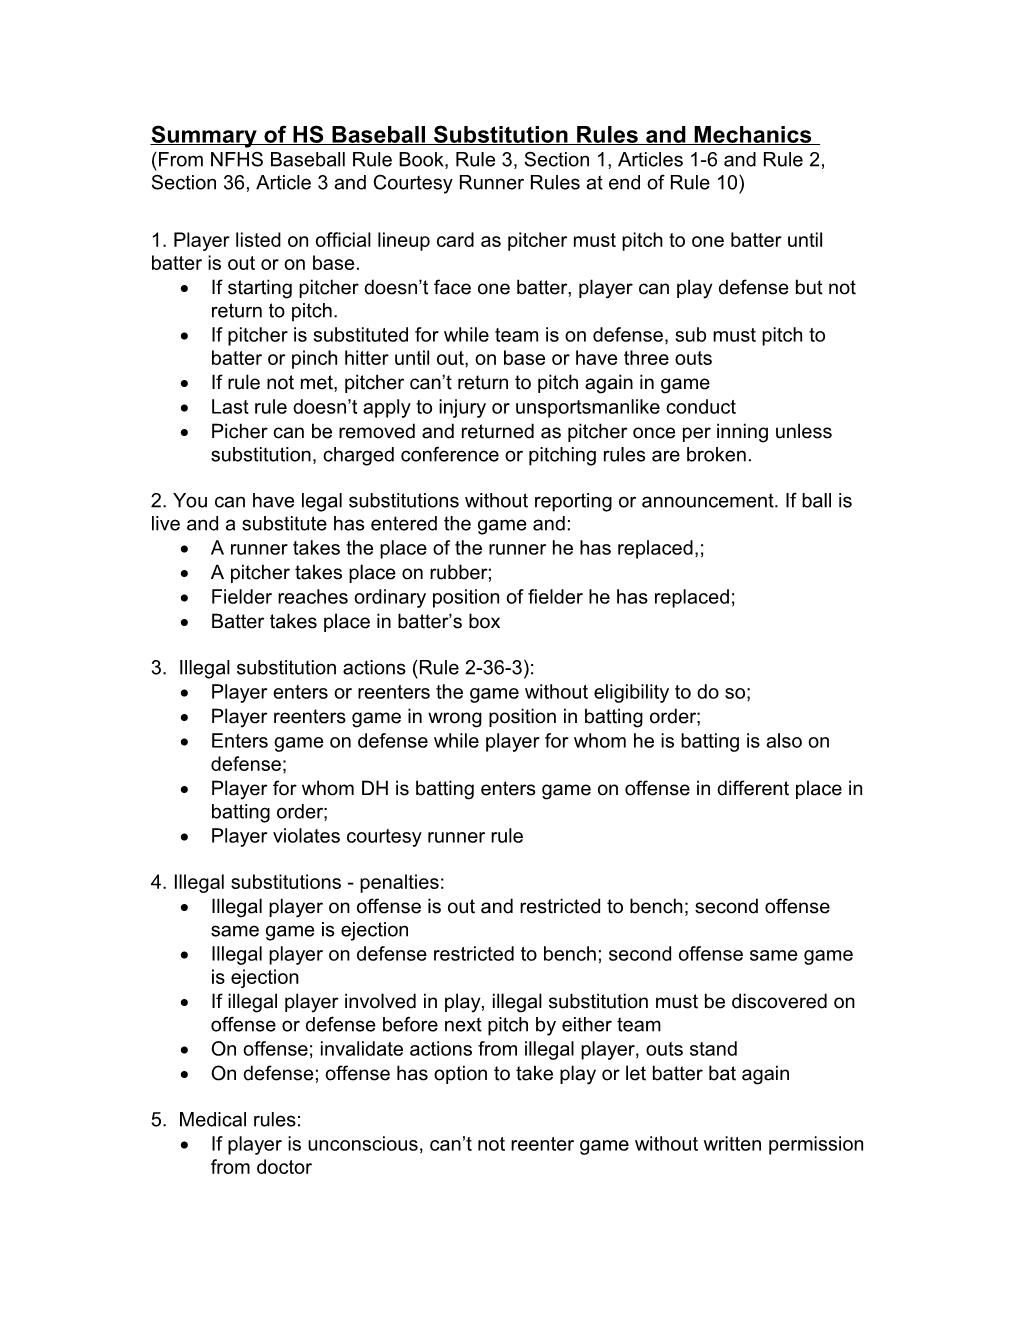 Summary Of HS Substitution Rules For Baseball